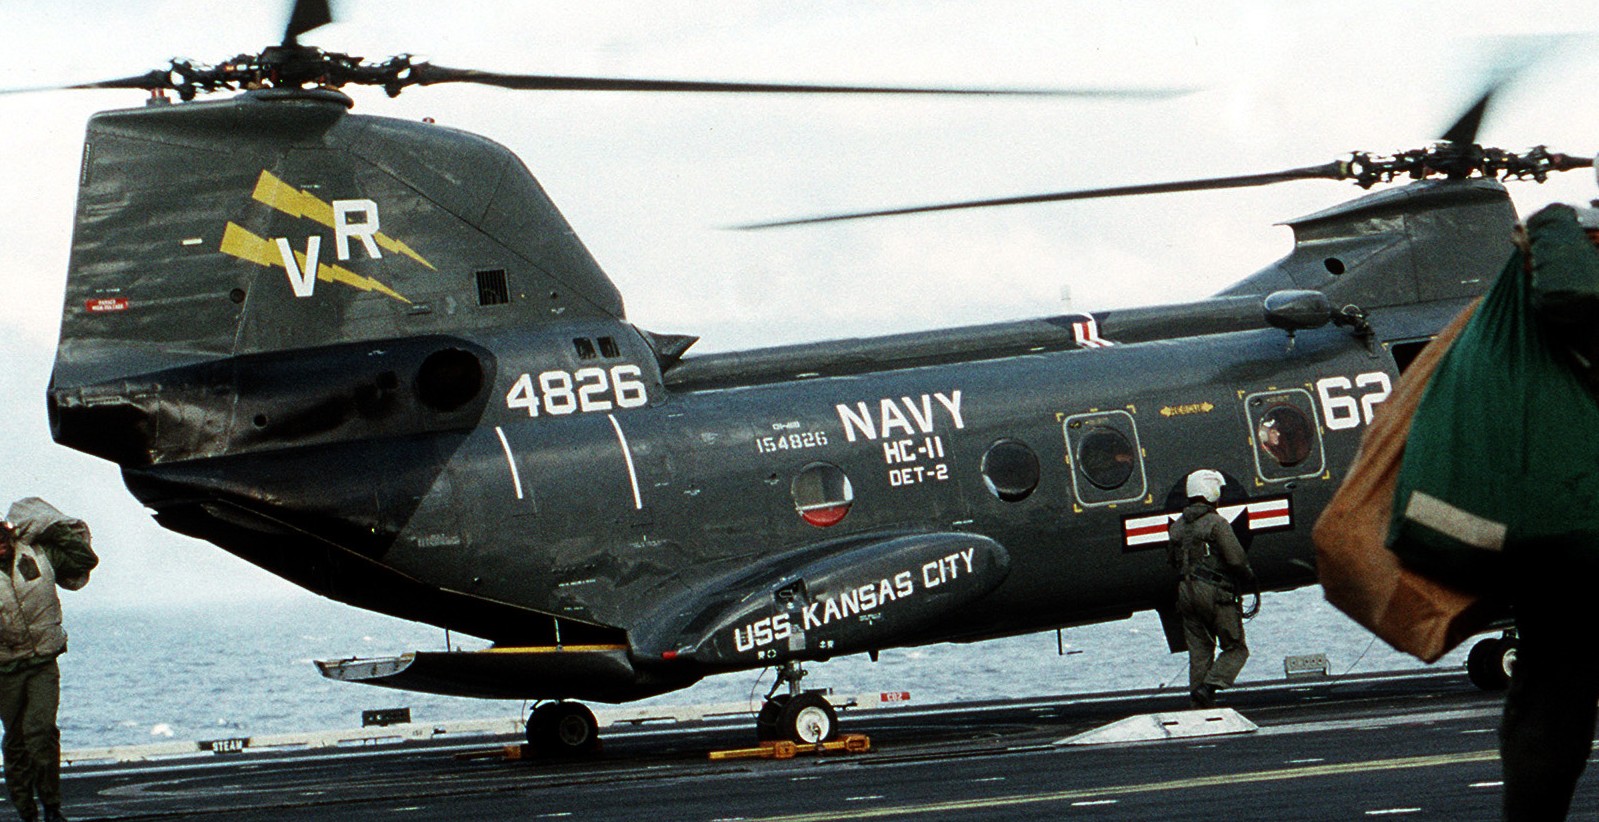 hc-11 gunbearers helicopter combat support squadron navy ch-46 sea knight 138